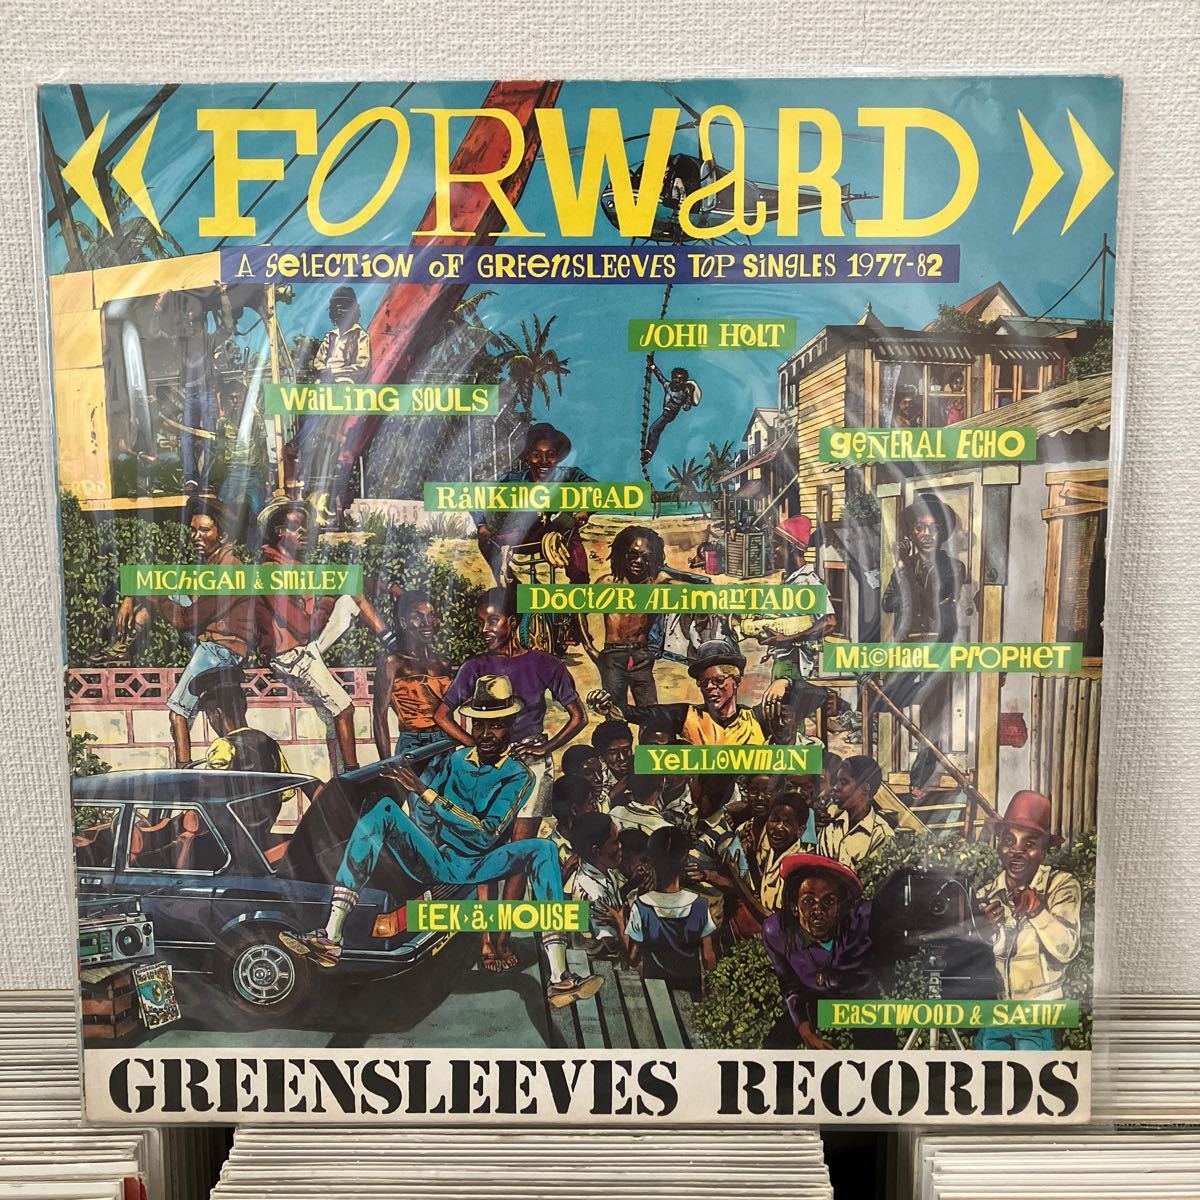 a selection of greensleaves top single 1977-82_画像1